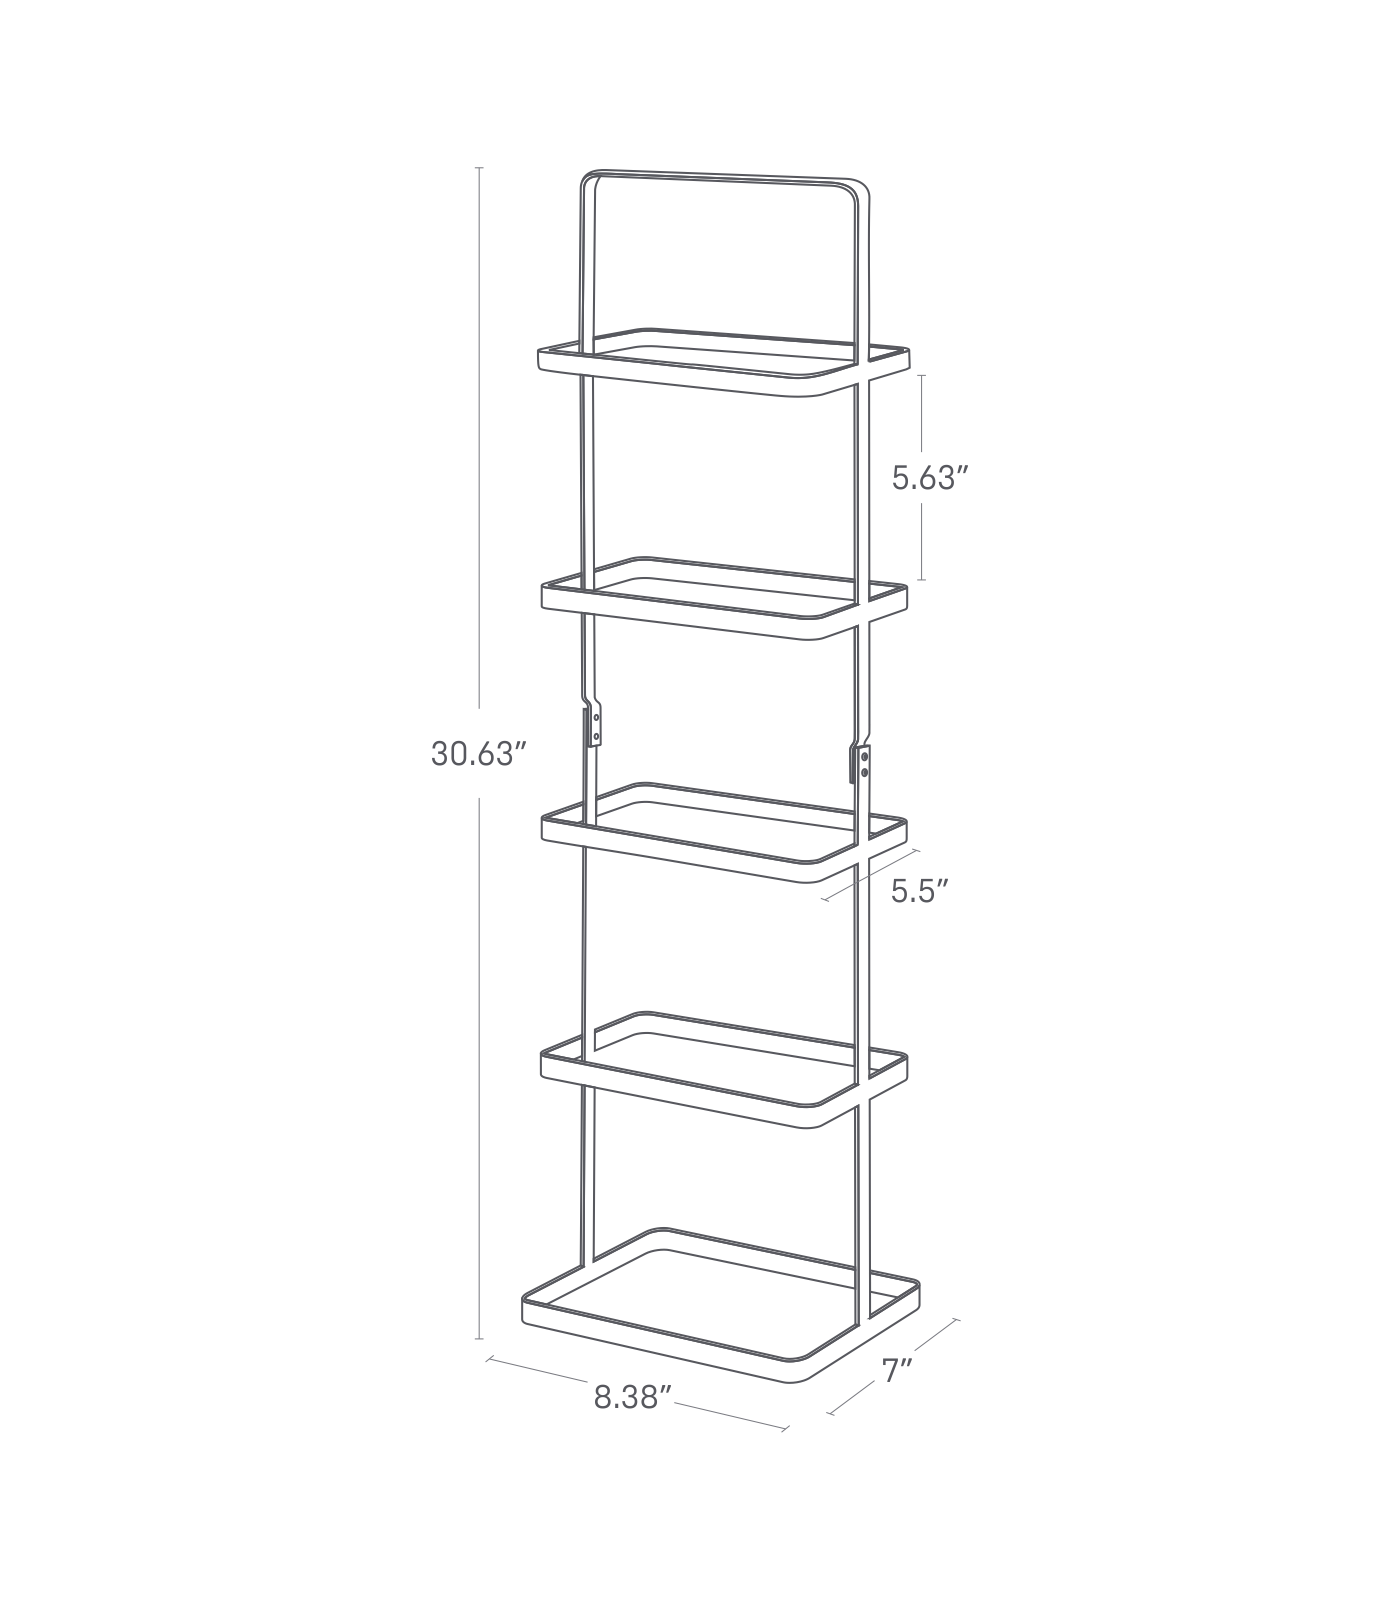 Dimension image for Shoe Rack showing length of 8.38